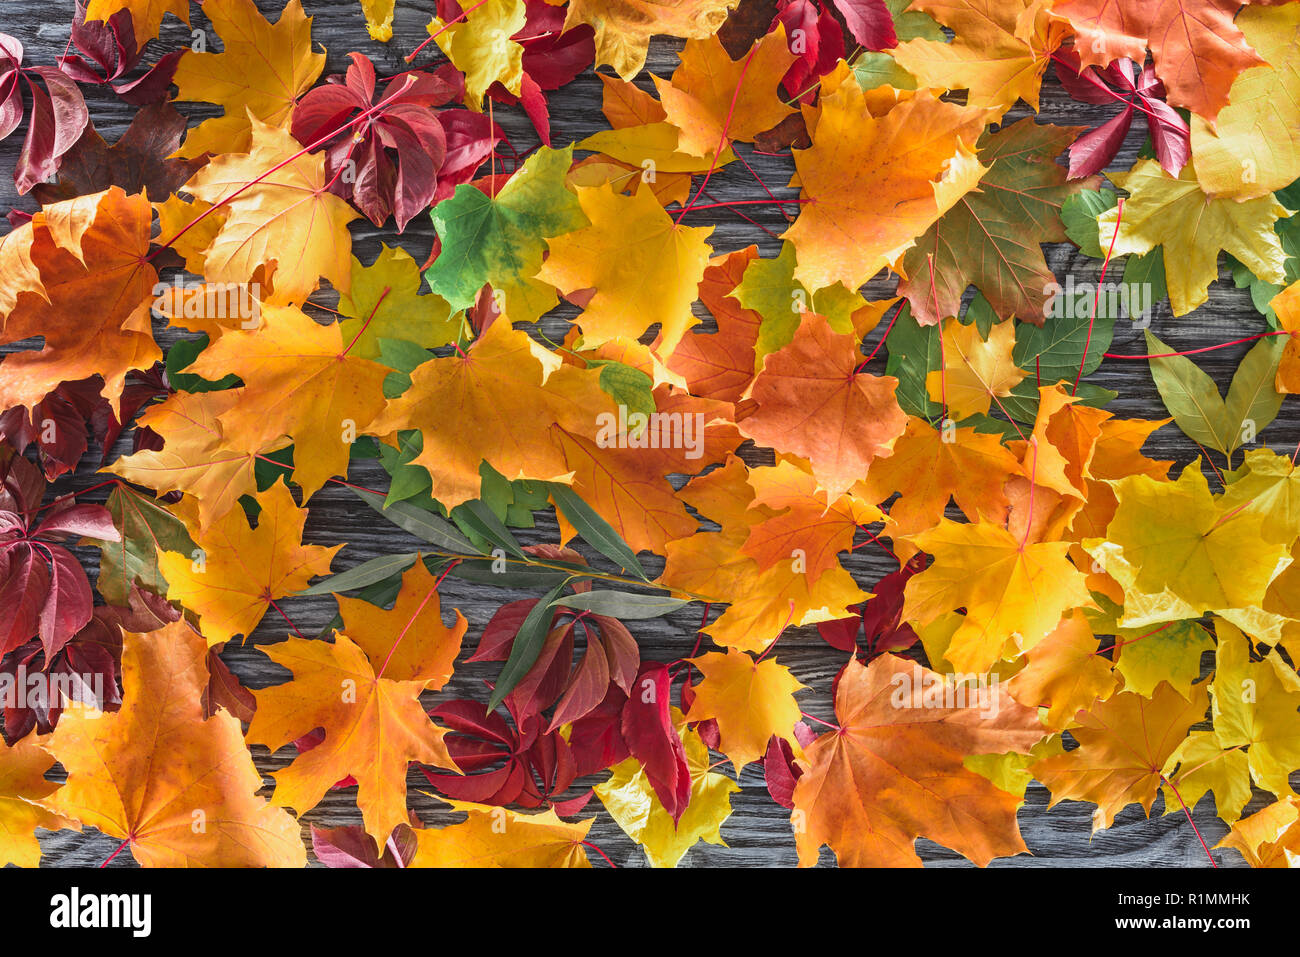 top view of autumnal colored leaves on wooden grey surface Stock Photo